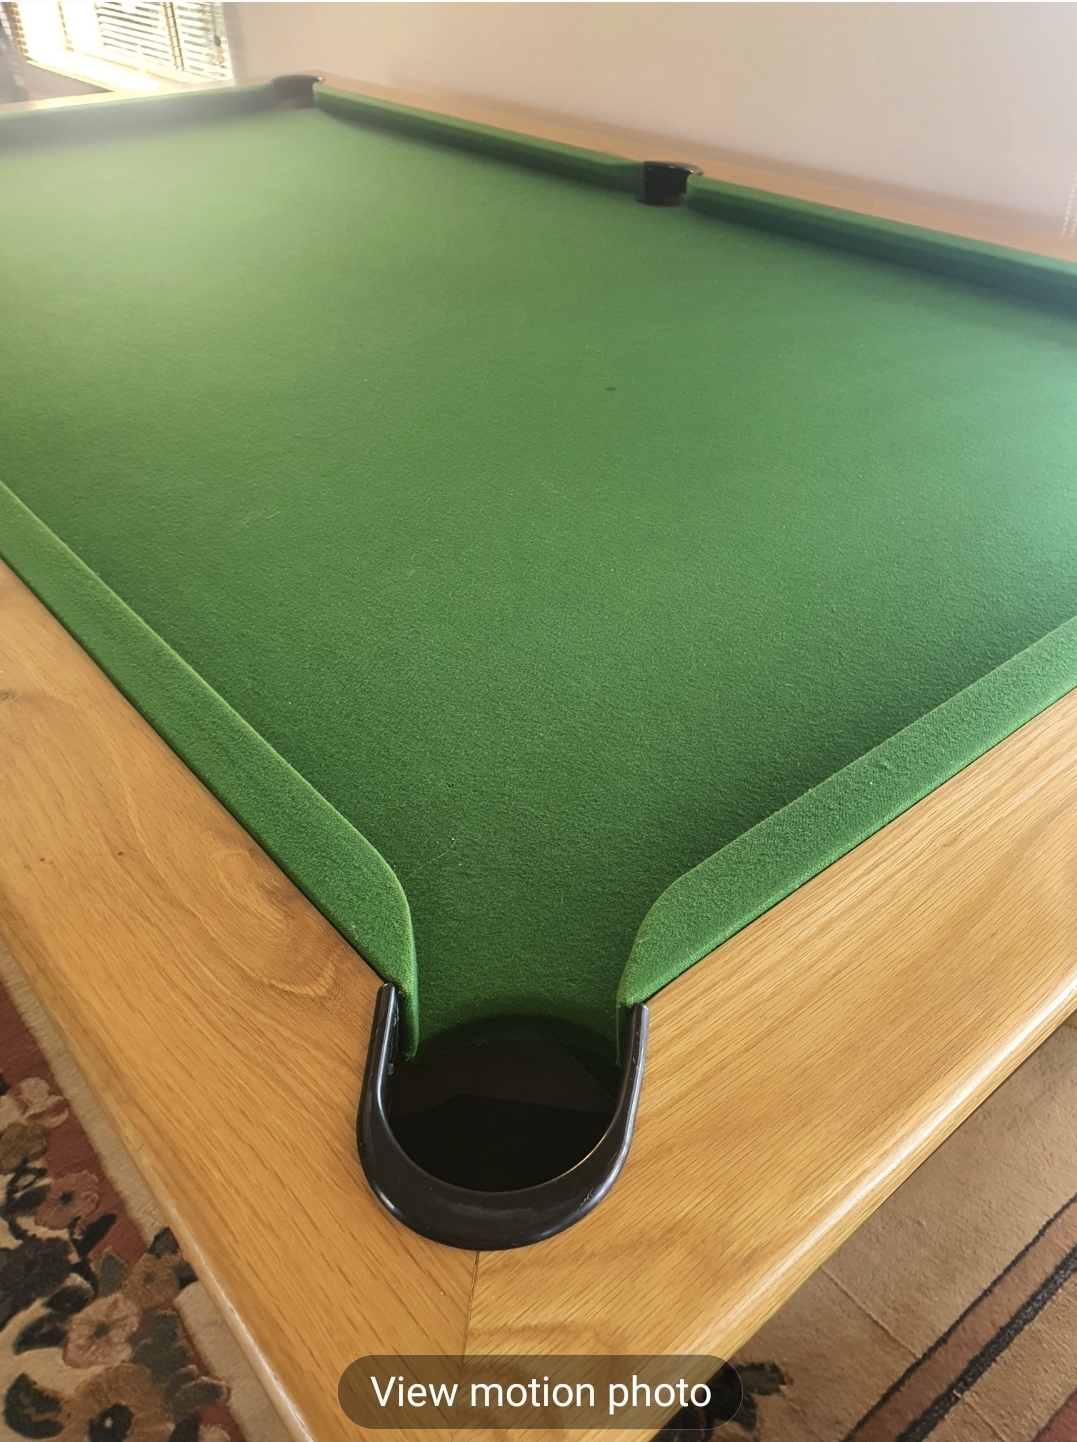 Pool table for sale, heavy, solid wood, very good condition.